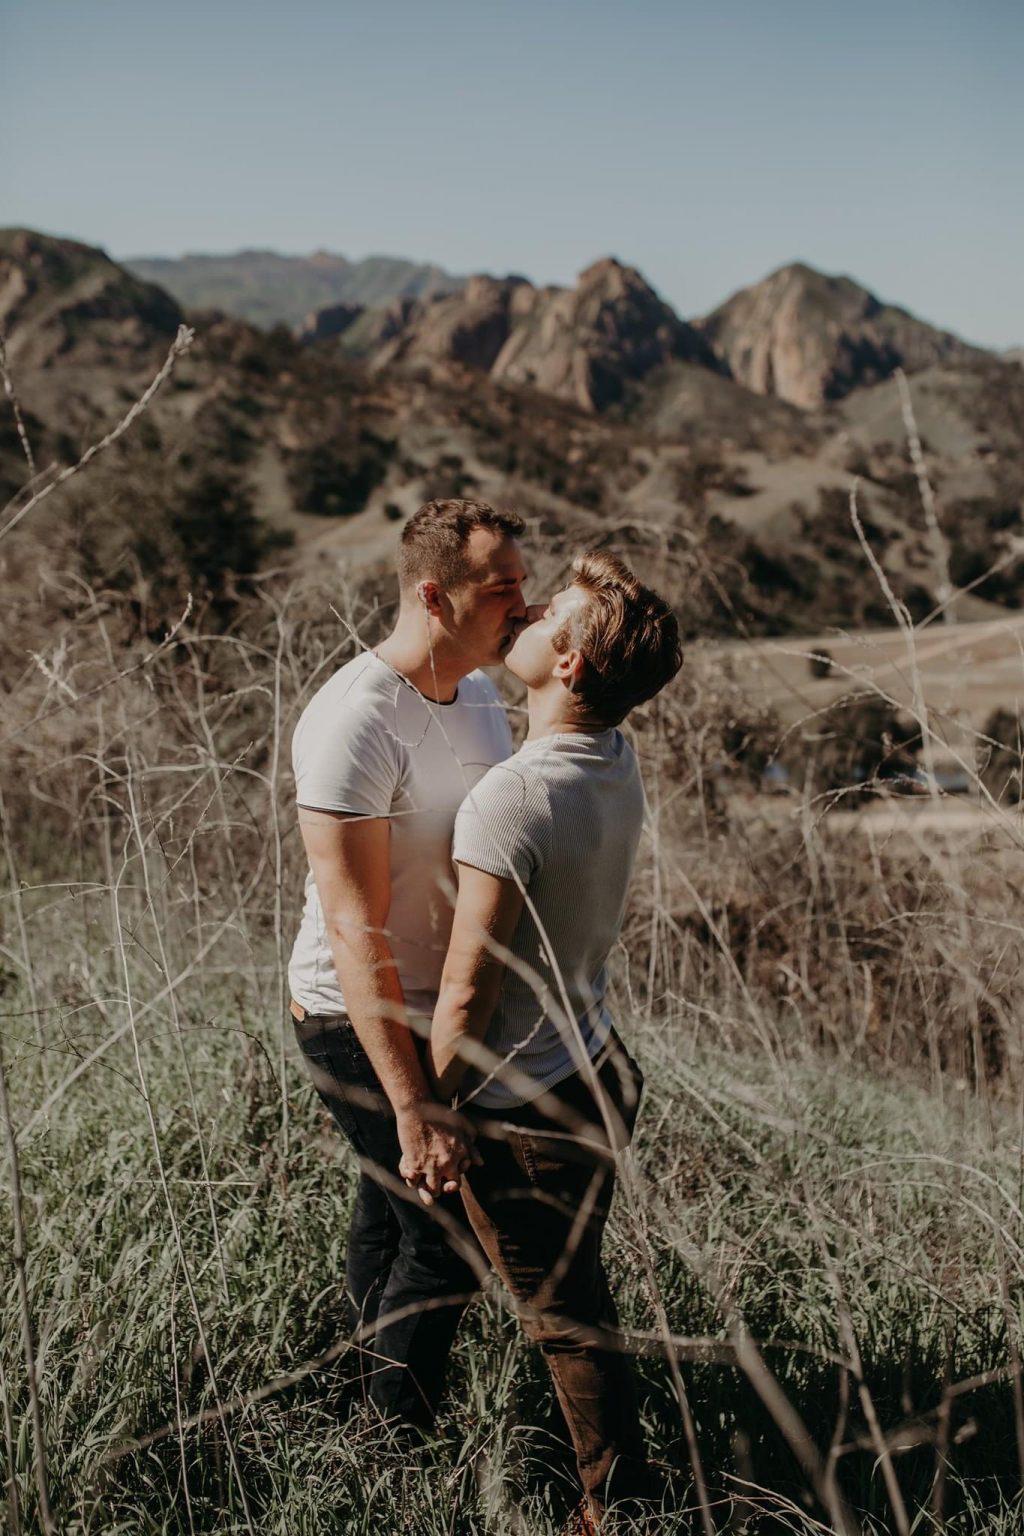 Knight and Clayton kiss in the mountains at Malibu Creek State Park for their engagement photos in February. Knight said they hope to inspire acceptance for all queer people and normalize the queer community in society.